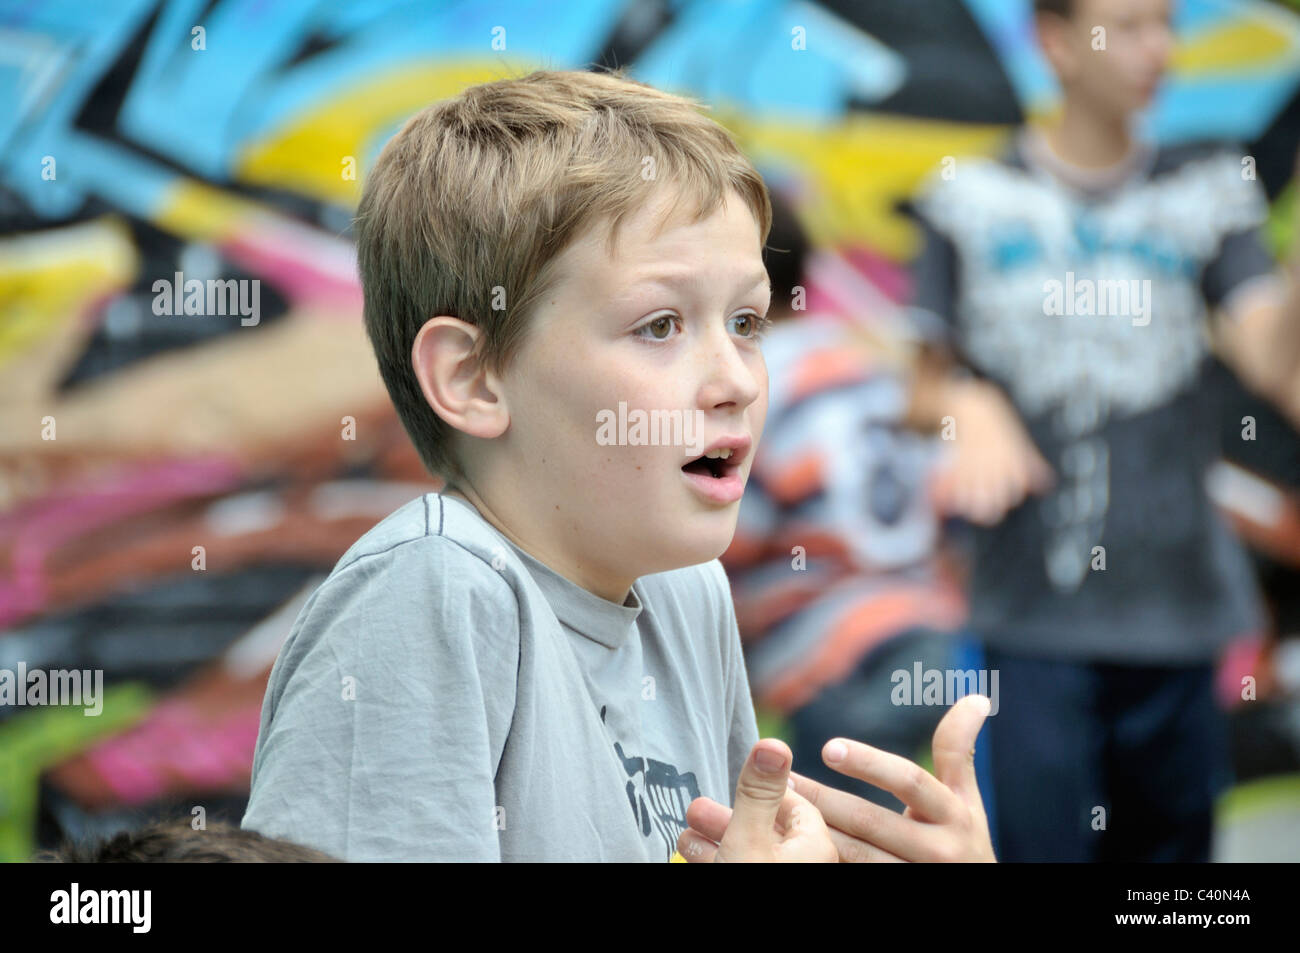 Place Bolz, boy, Germany, Europe, European, young, Jungs, kid, child, Cologne, person, model released, person, ten-year-old Stock Photo